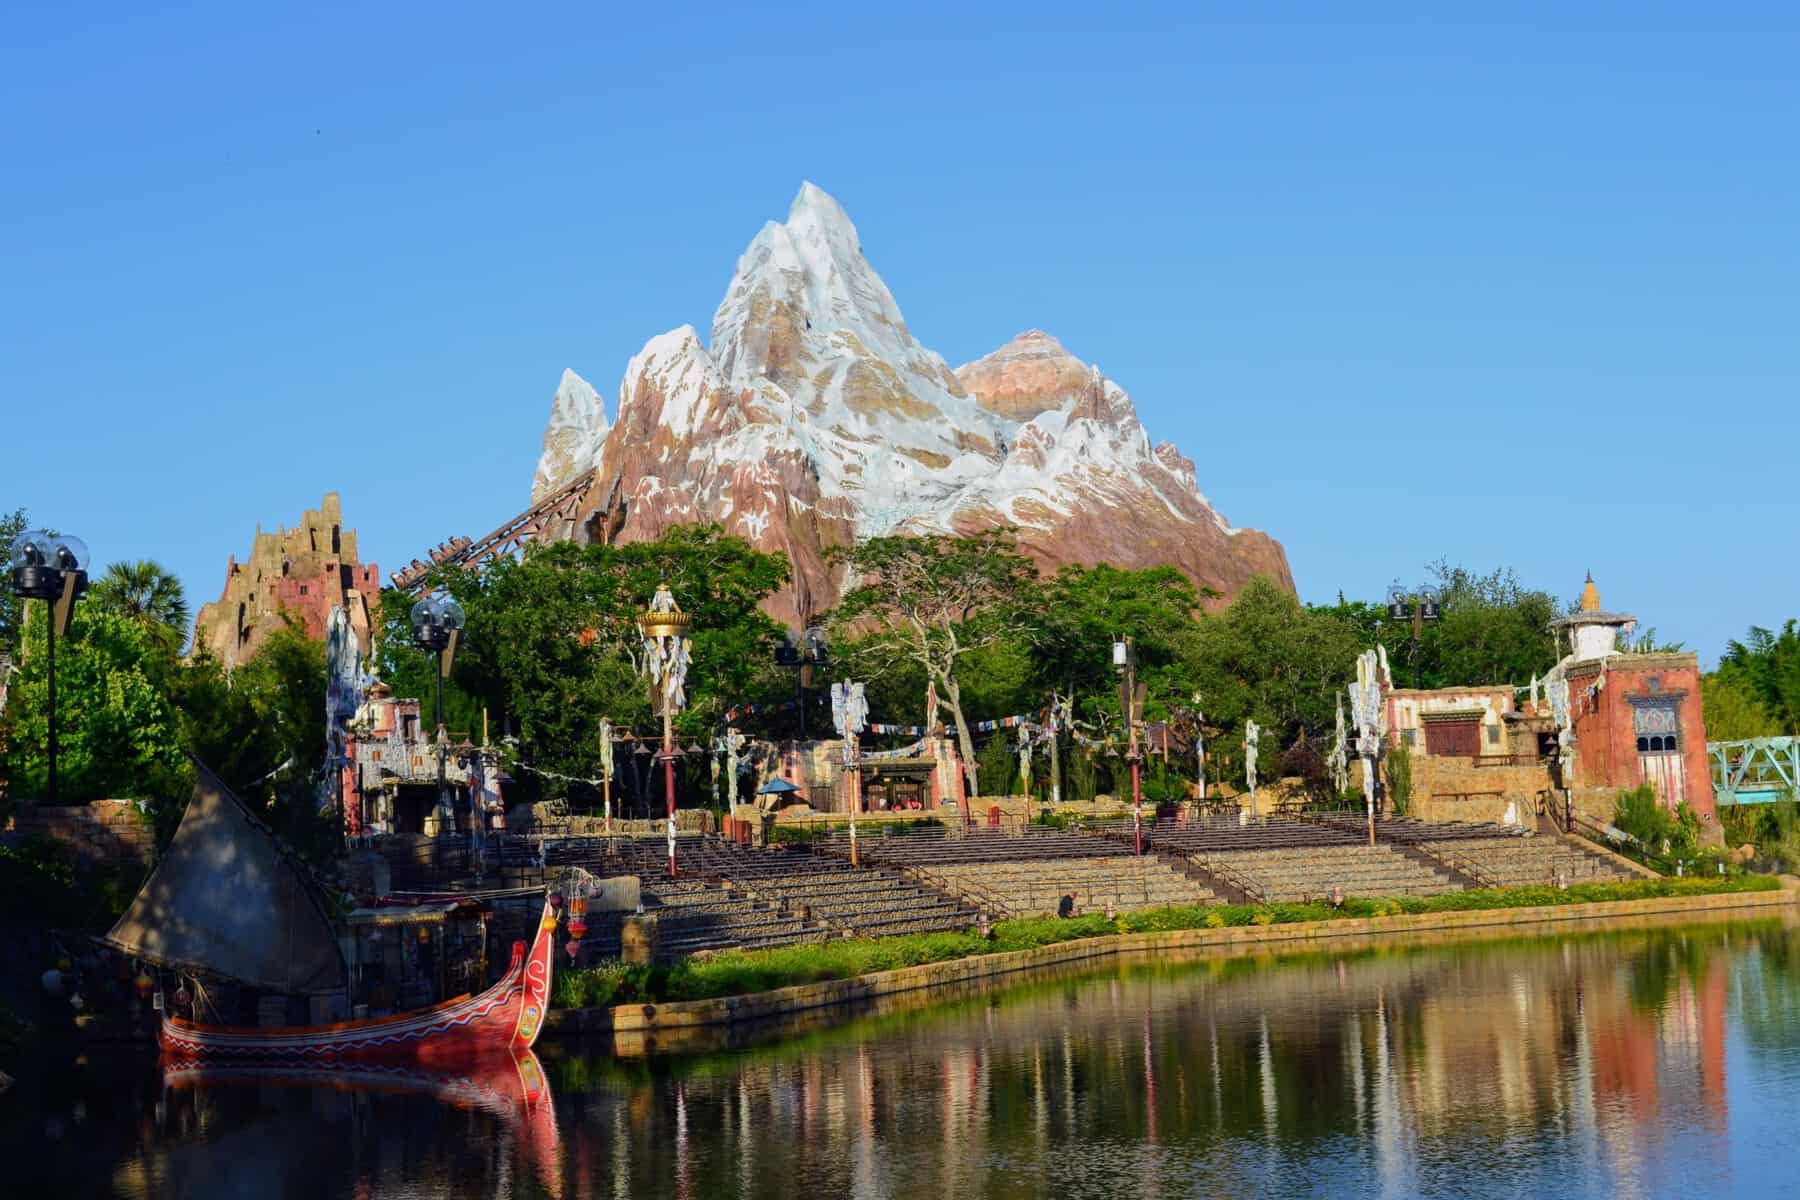 Guide to Every Attraction at Disney World's Animal Kingdom - WDW Prep School